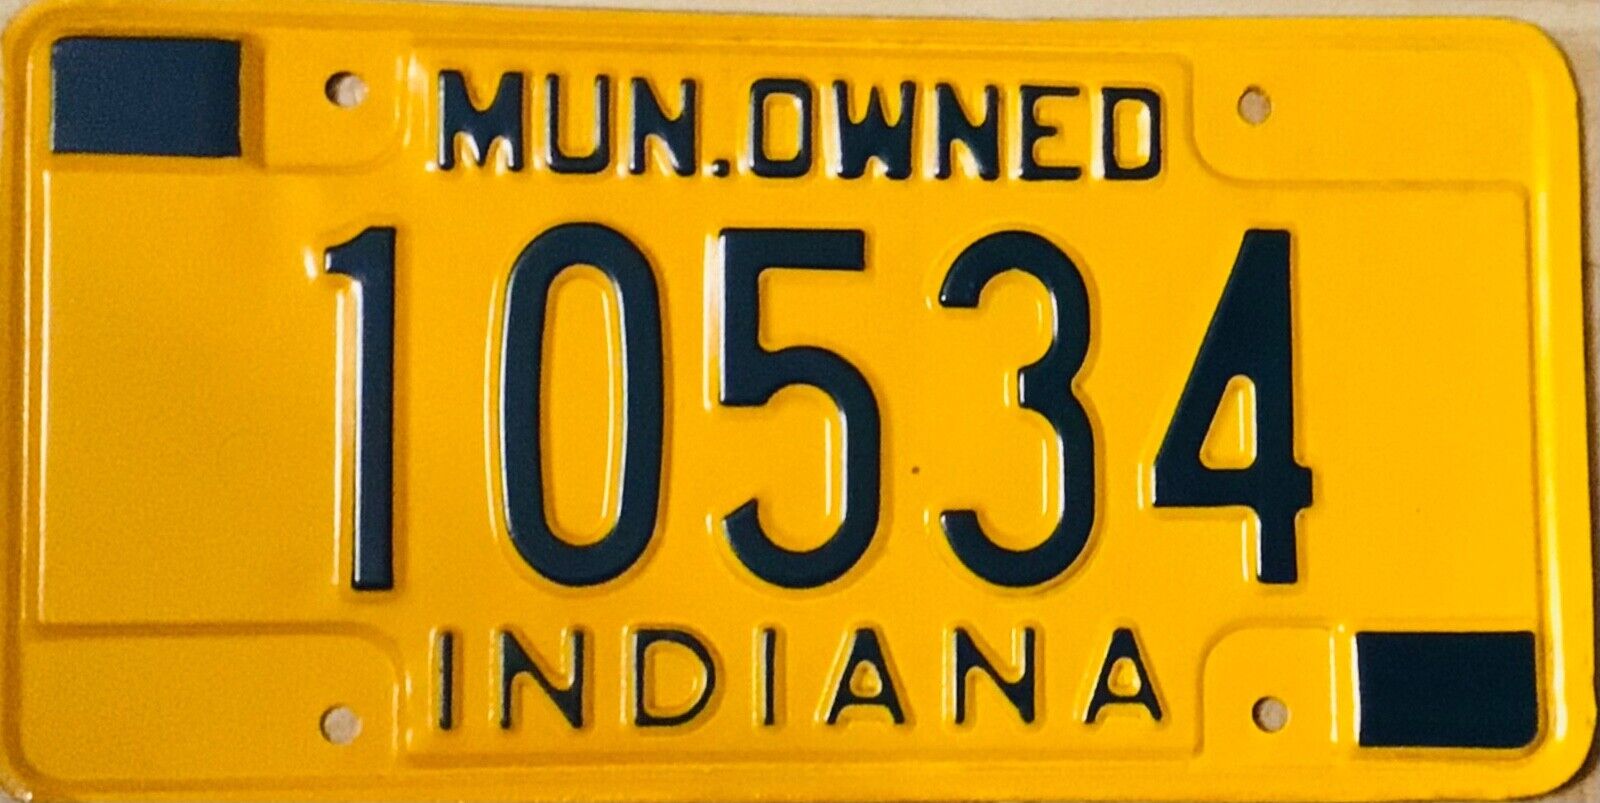 Indiana license plate- Municipal owned Government Official